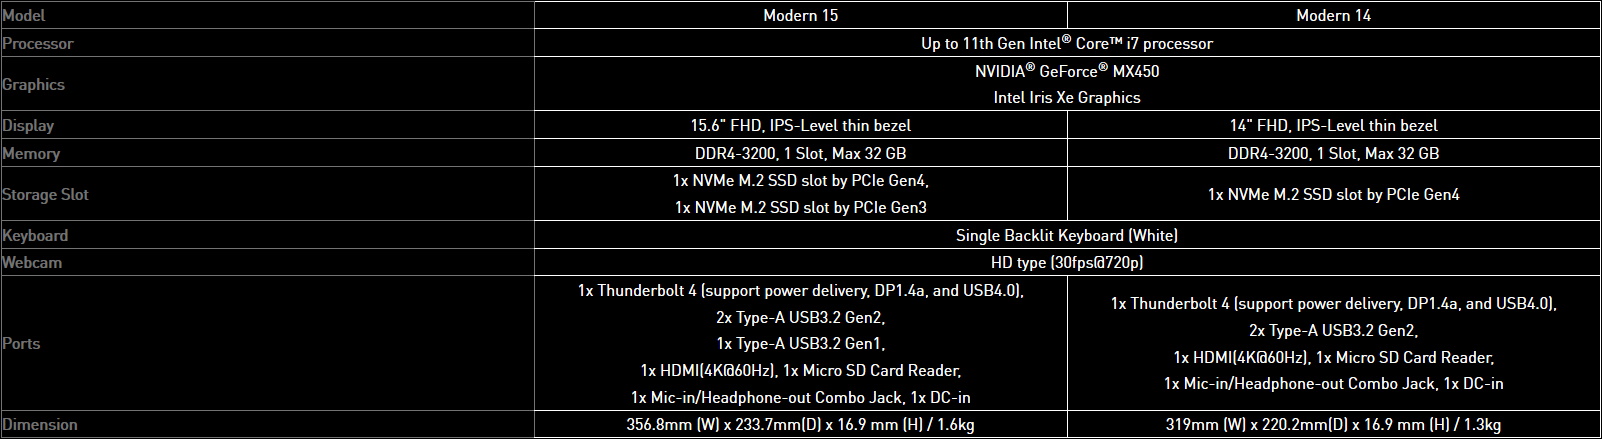 MSI Announces All-New Business Laptops With 11th Gen Tiger Lake CPUs And Optional GTX 1650 Ti